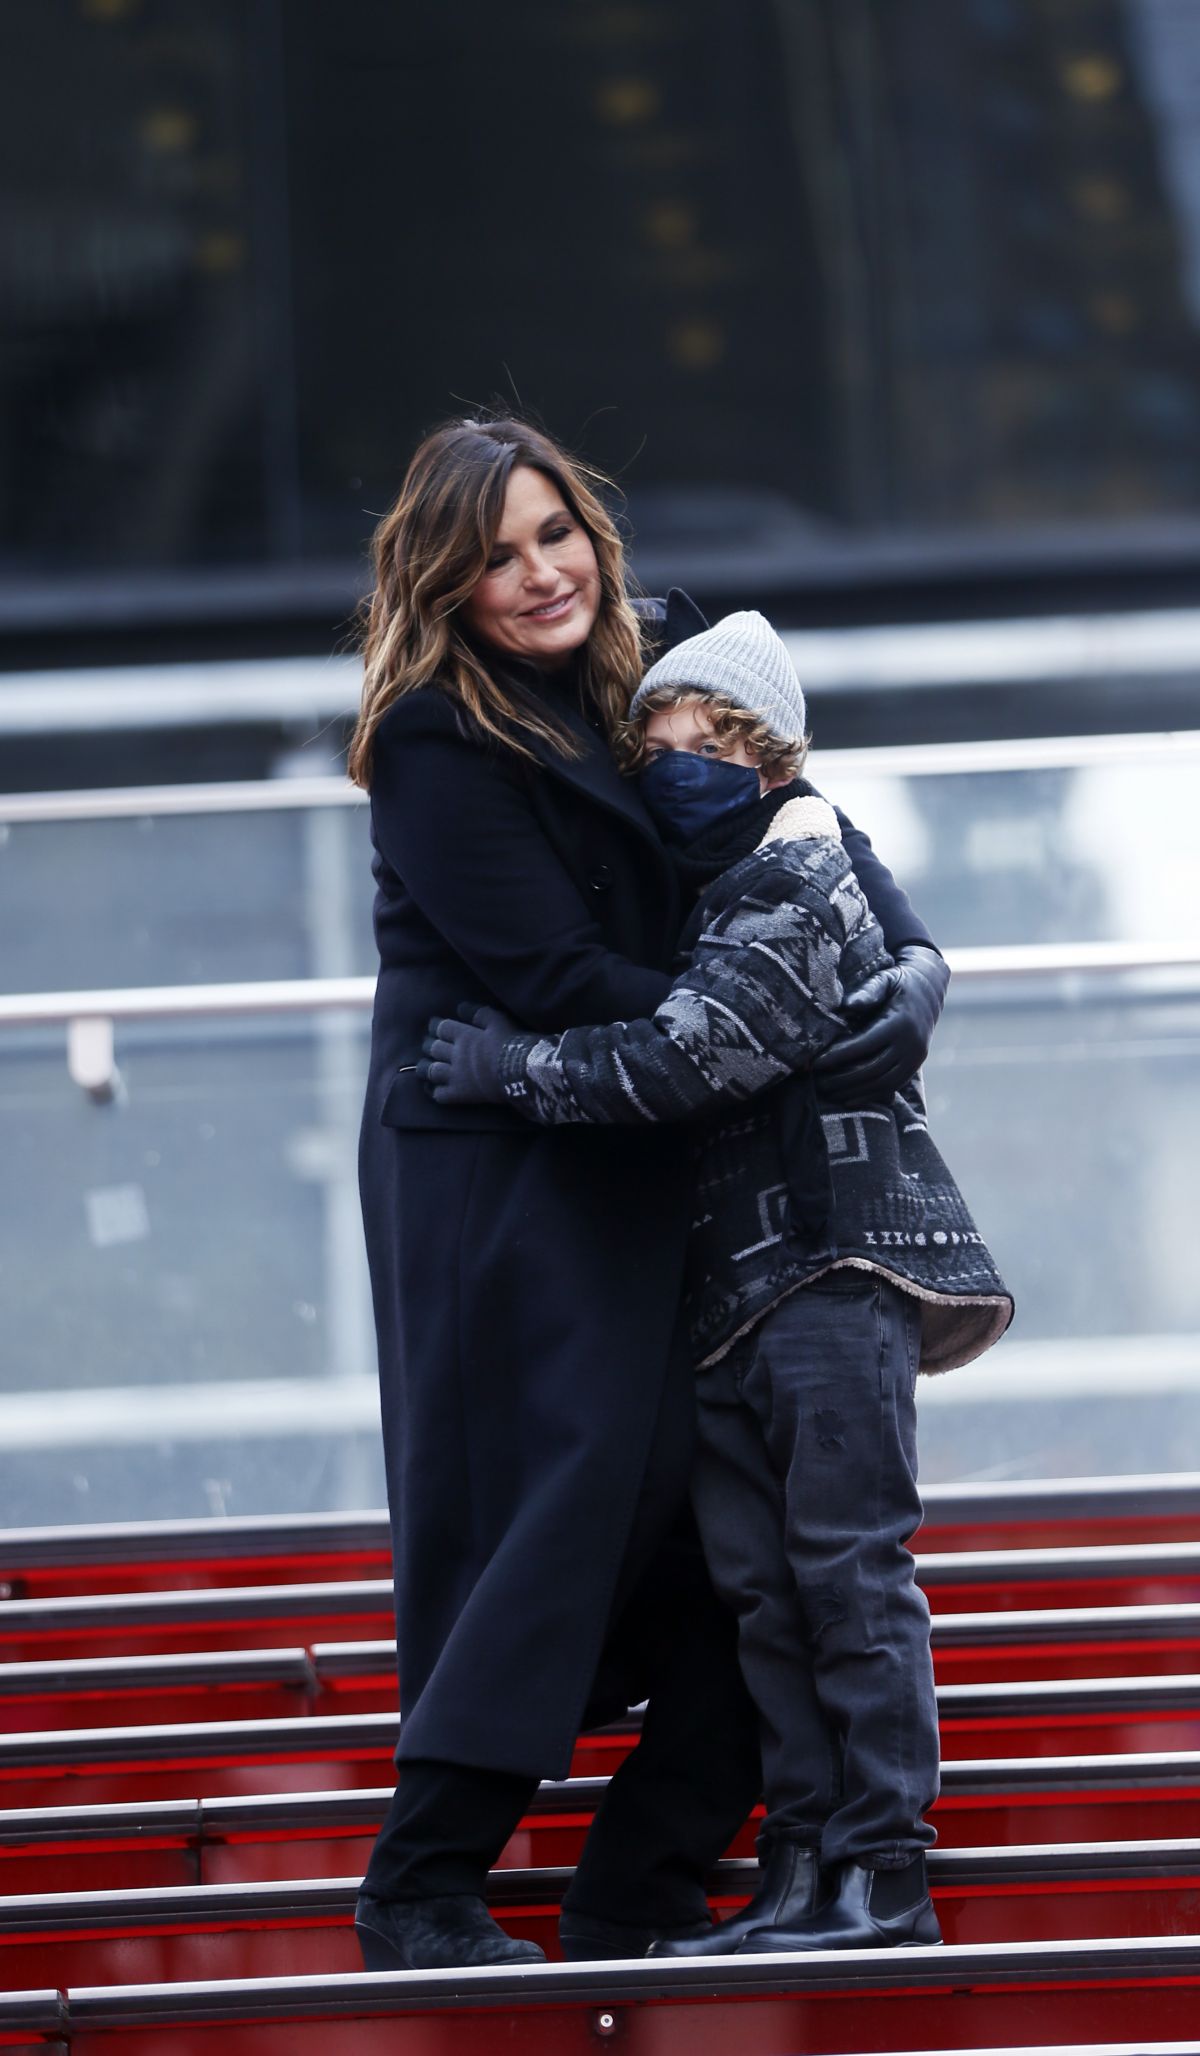 Mariska Hargitay on the set of Law & Order: Special Victims Unit in New York 2020/11/22